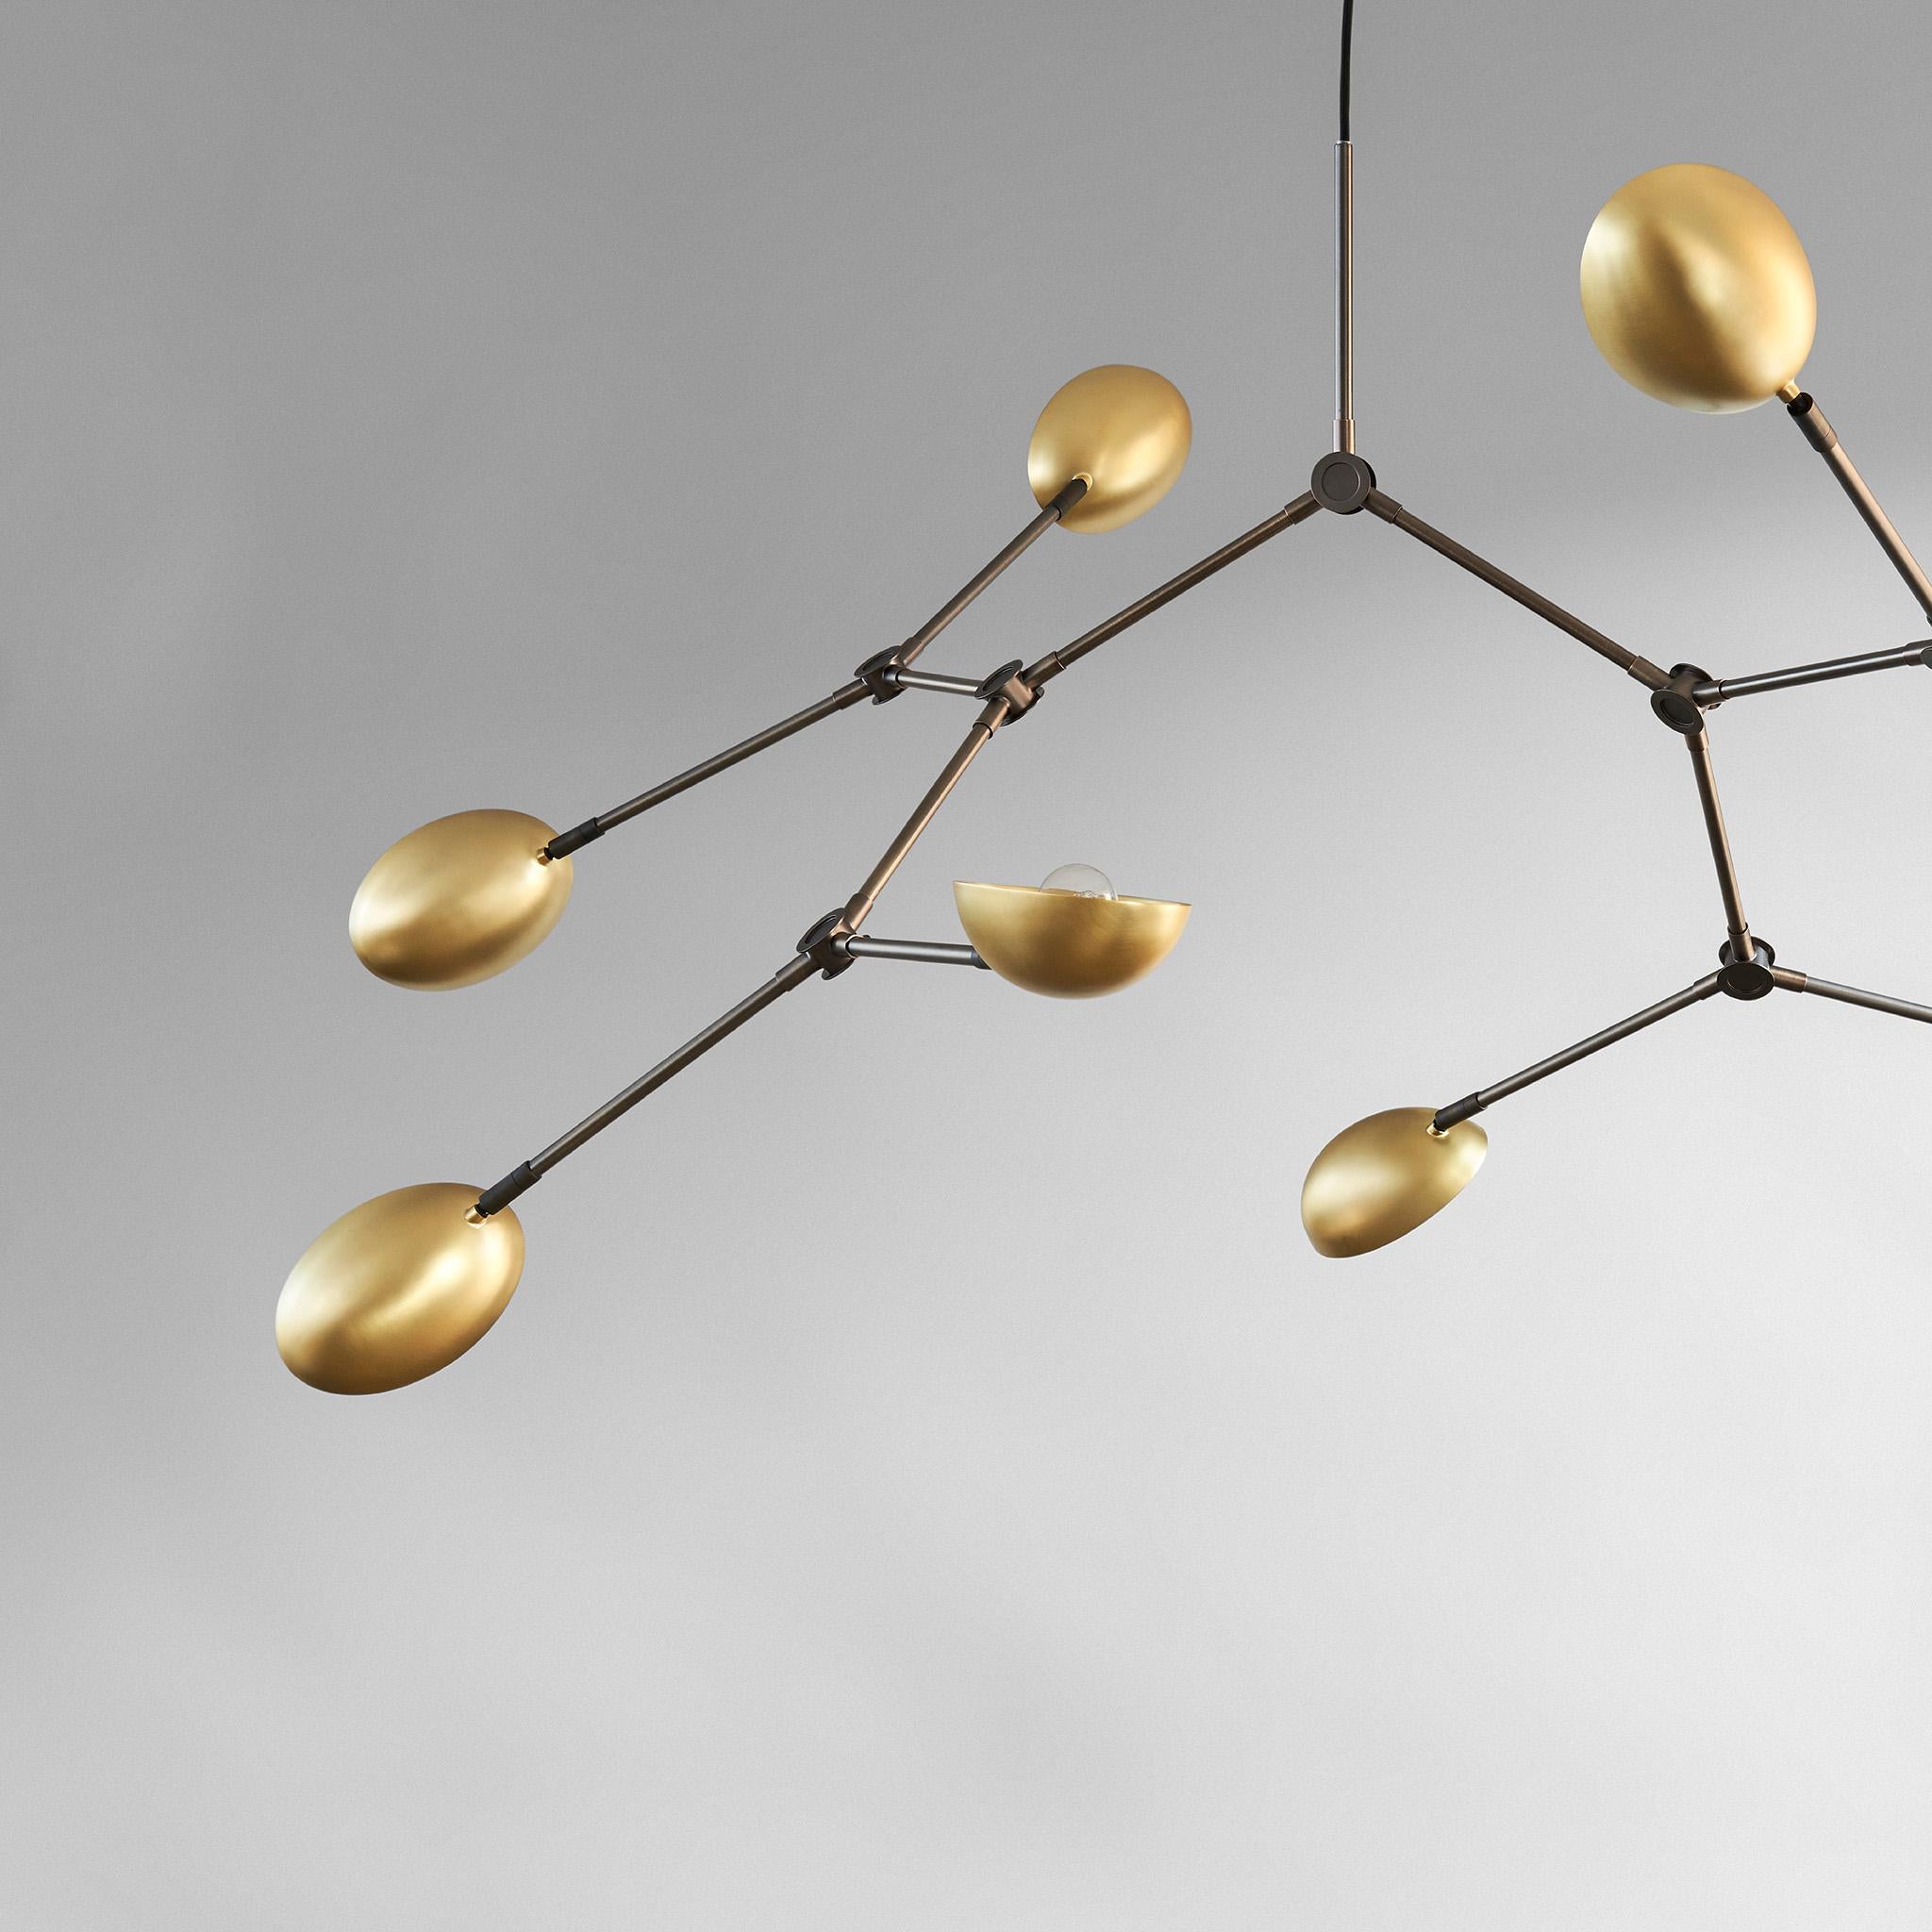 Mini Drop chandelier brass by 101 Copenhagen
Designed by Kristian Sofus Hansen & Tommy Hyldahl.
Dimensions: H95 x L100 x W95 CM
Materials: Brass; Lampshade & Ceiling cup: 100% Iron, with the plated brass finish; Pipes & attachment parts are made of